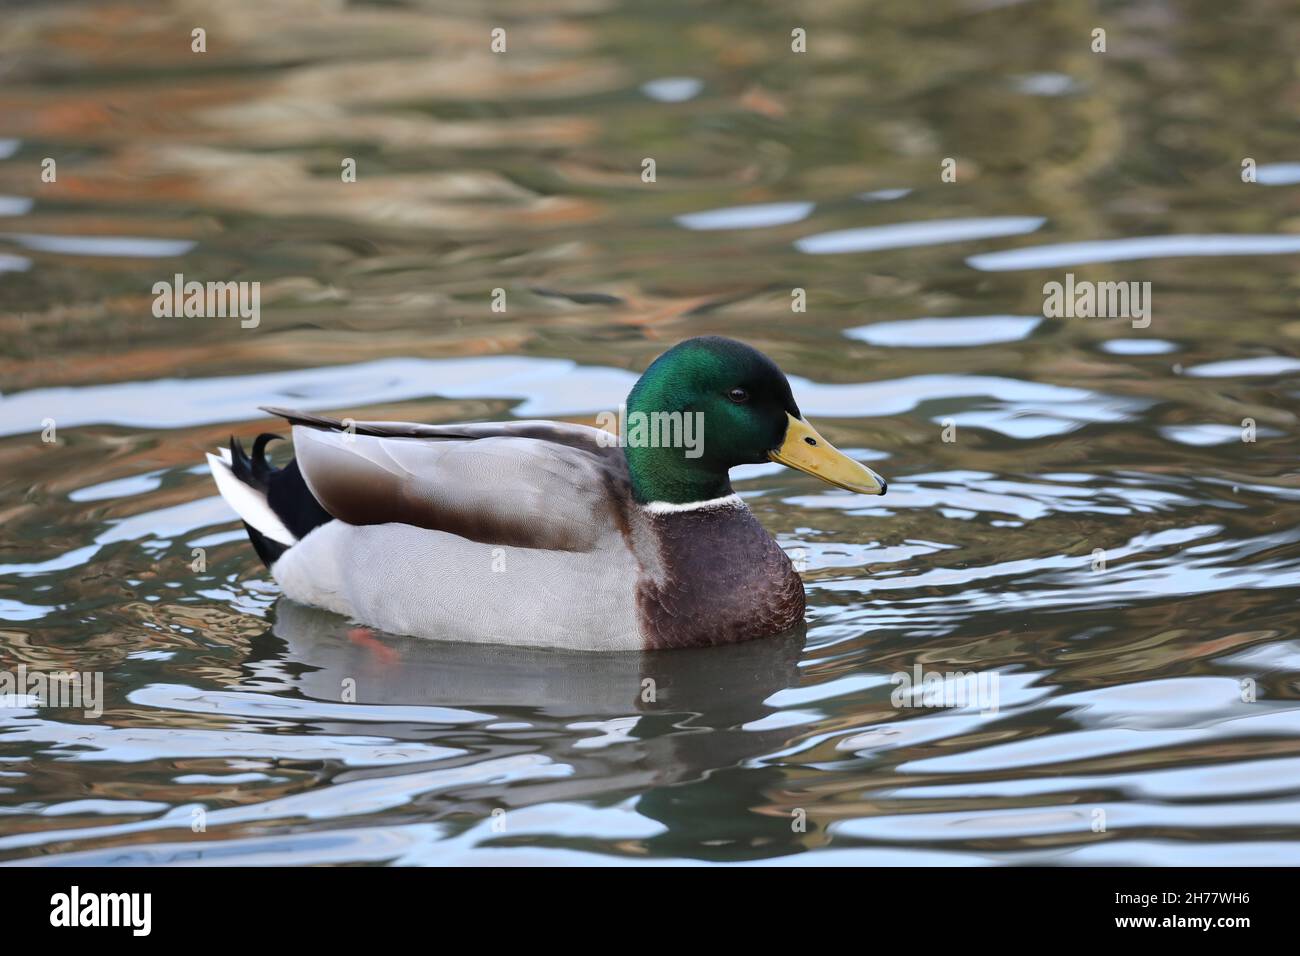 Mallard Duck Anas platyrhynchos. Drake or male, in adult breeding plumage. Sexually dimorphic species for much of the year. Swimming on water surface. Stock Photo